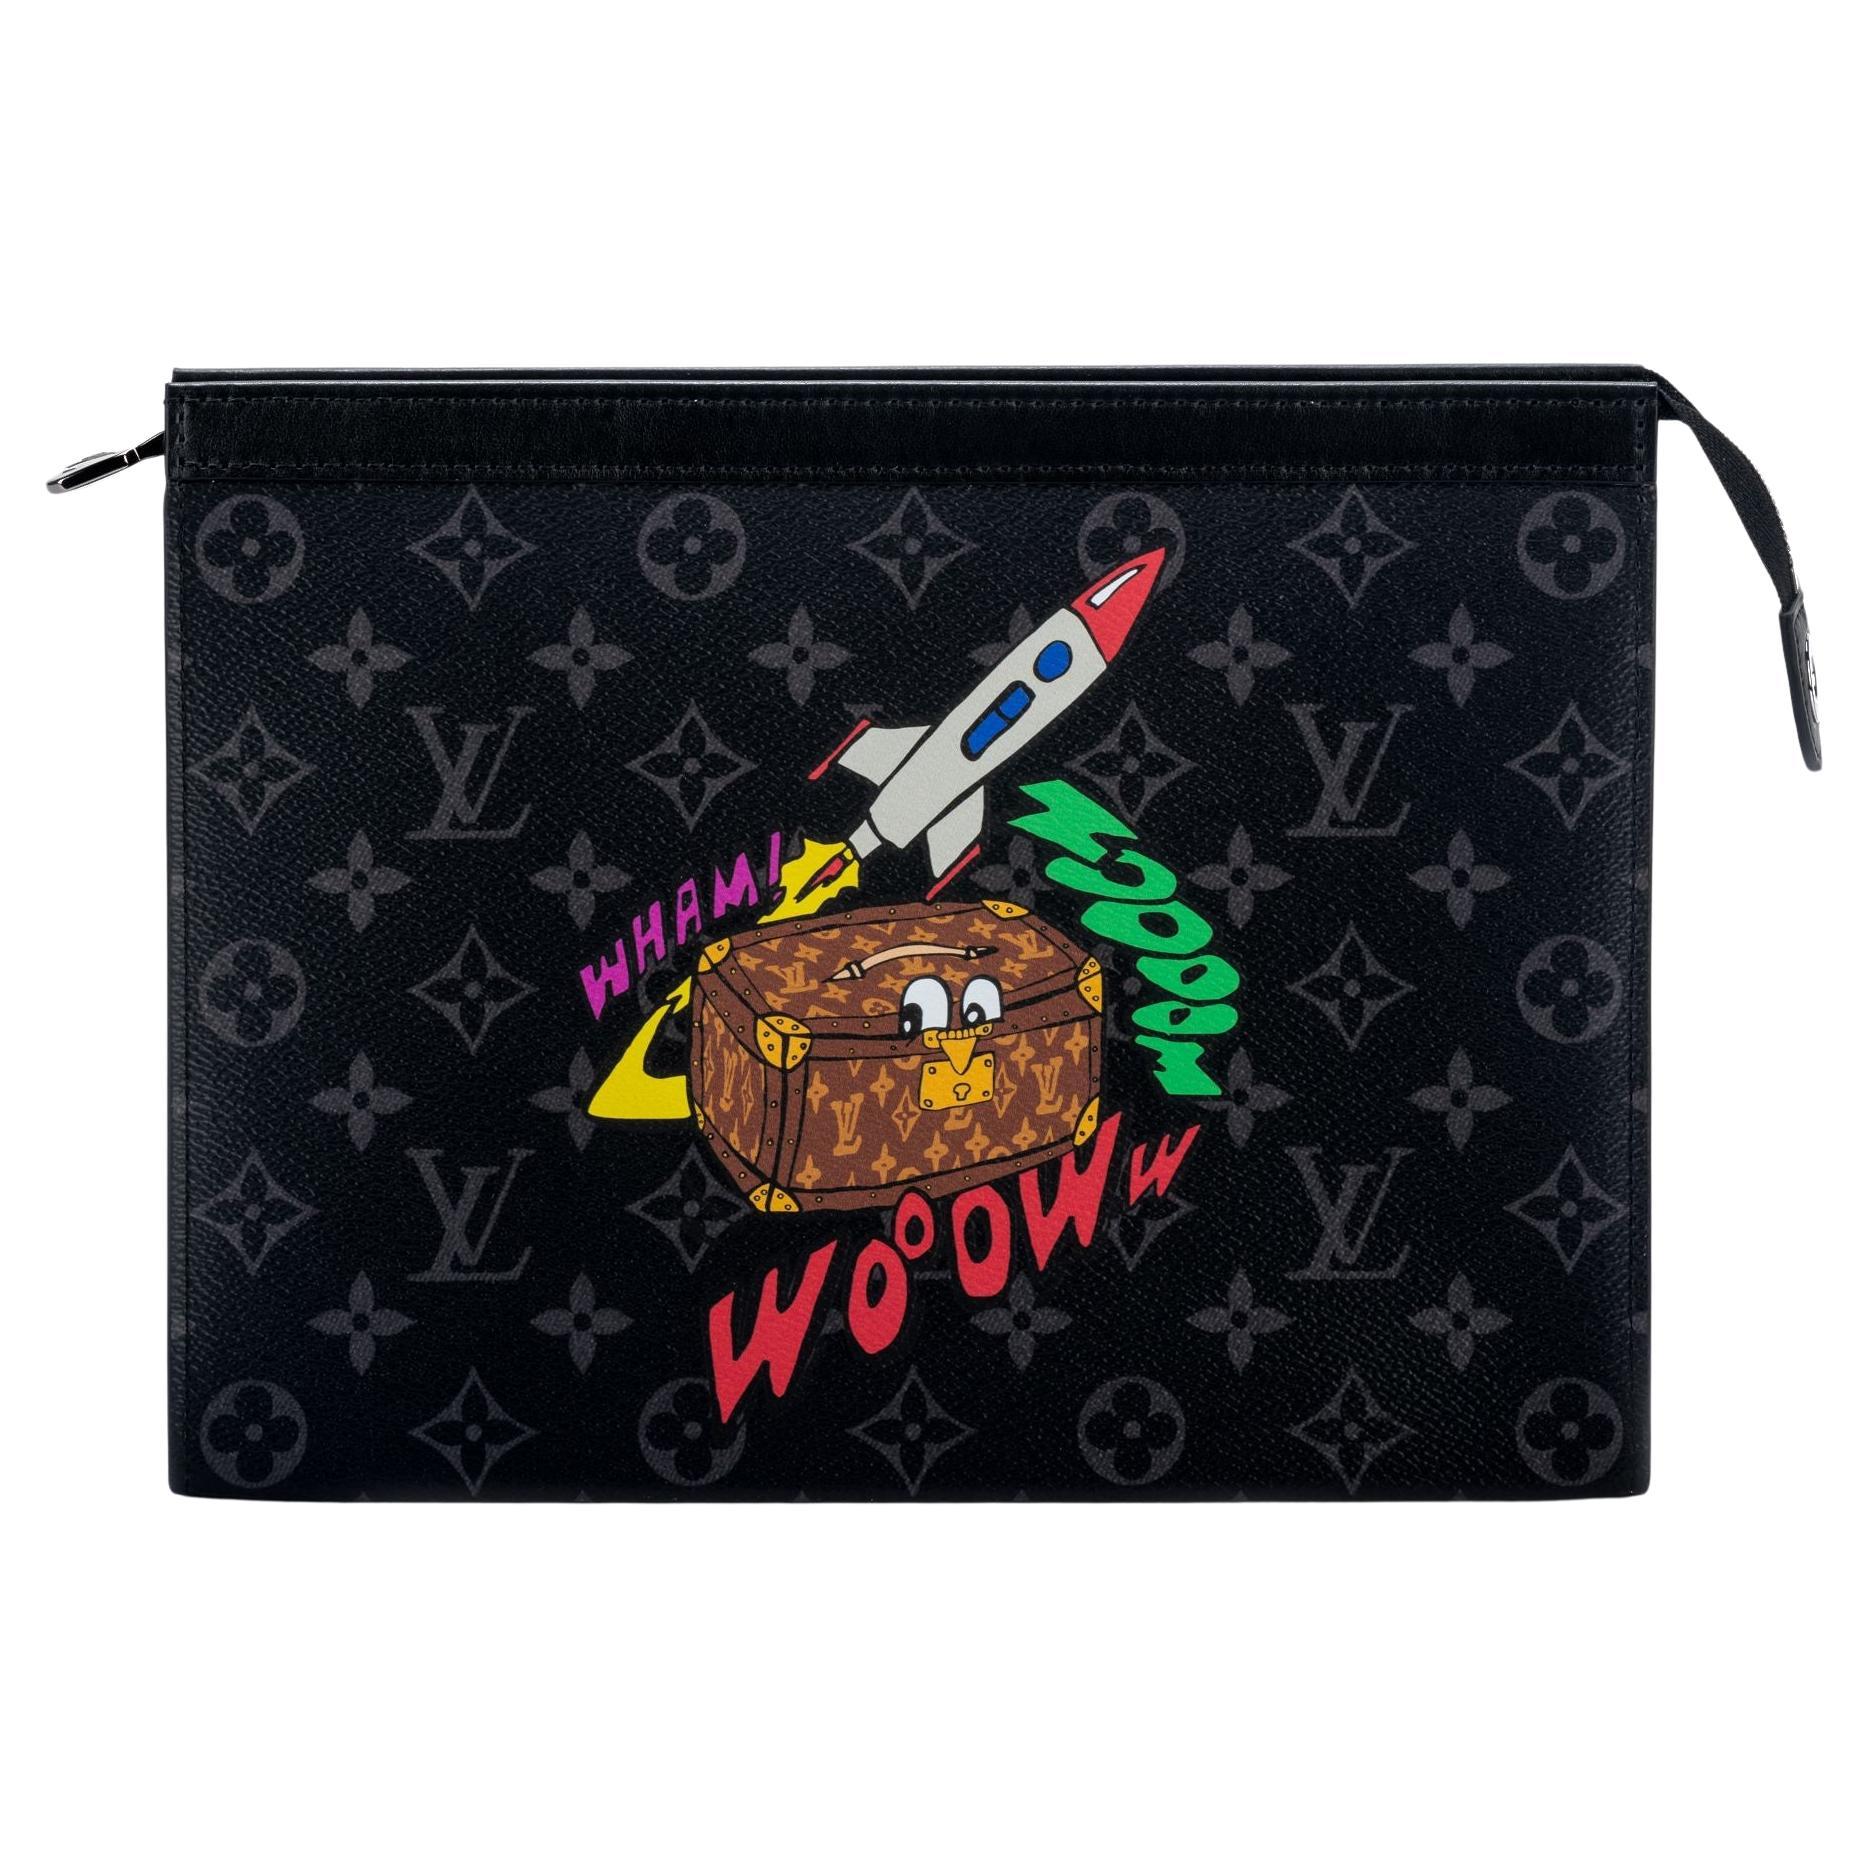 Louis Vuitton x Virgil Abloh Limited Edition Monogram Trunk, Wallet Trunk  Inside For Sale at 1stDibs